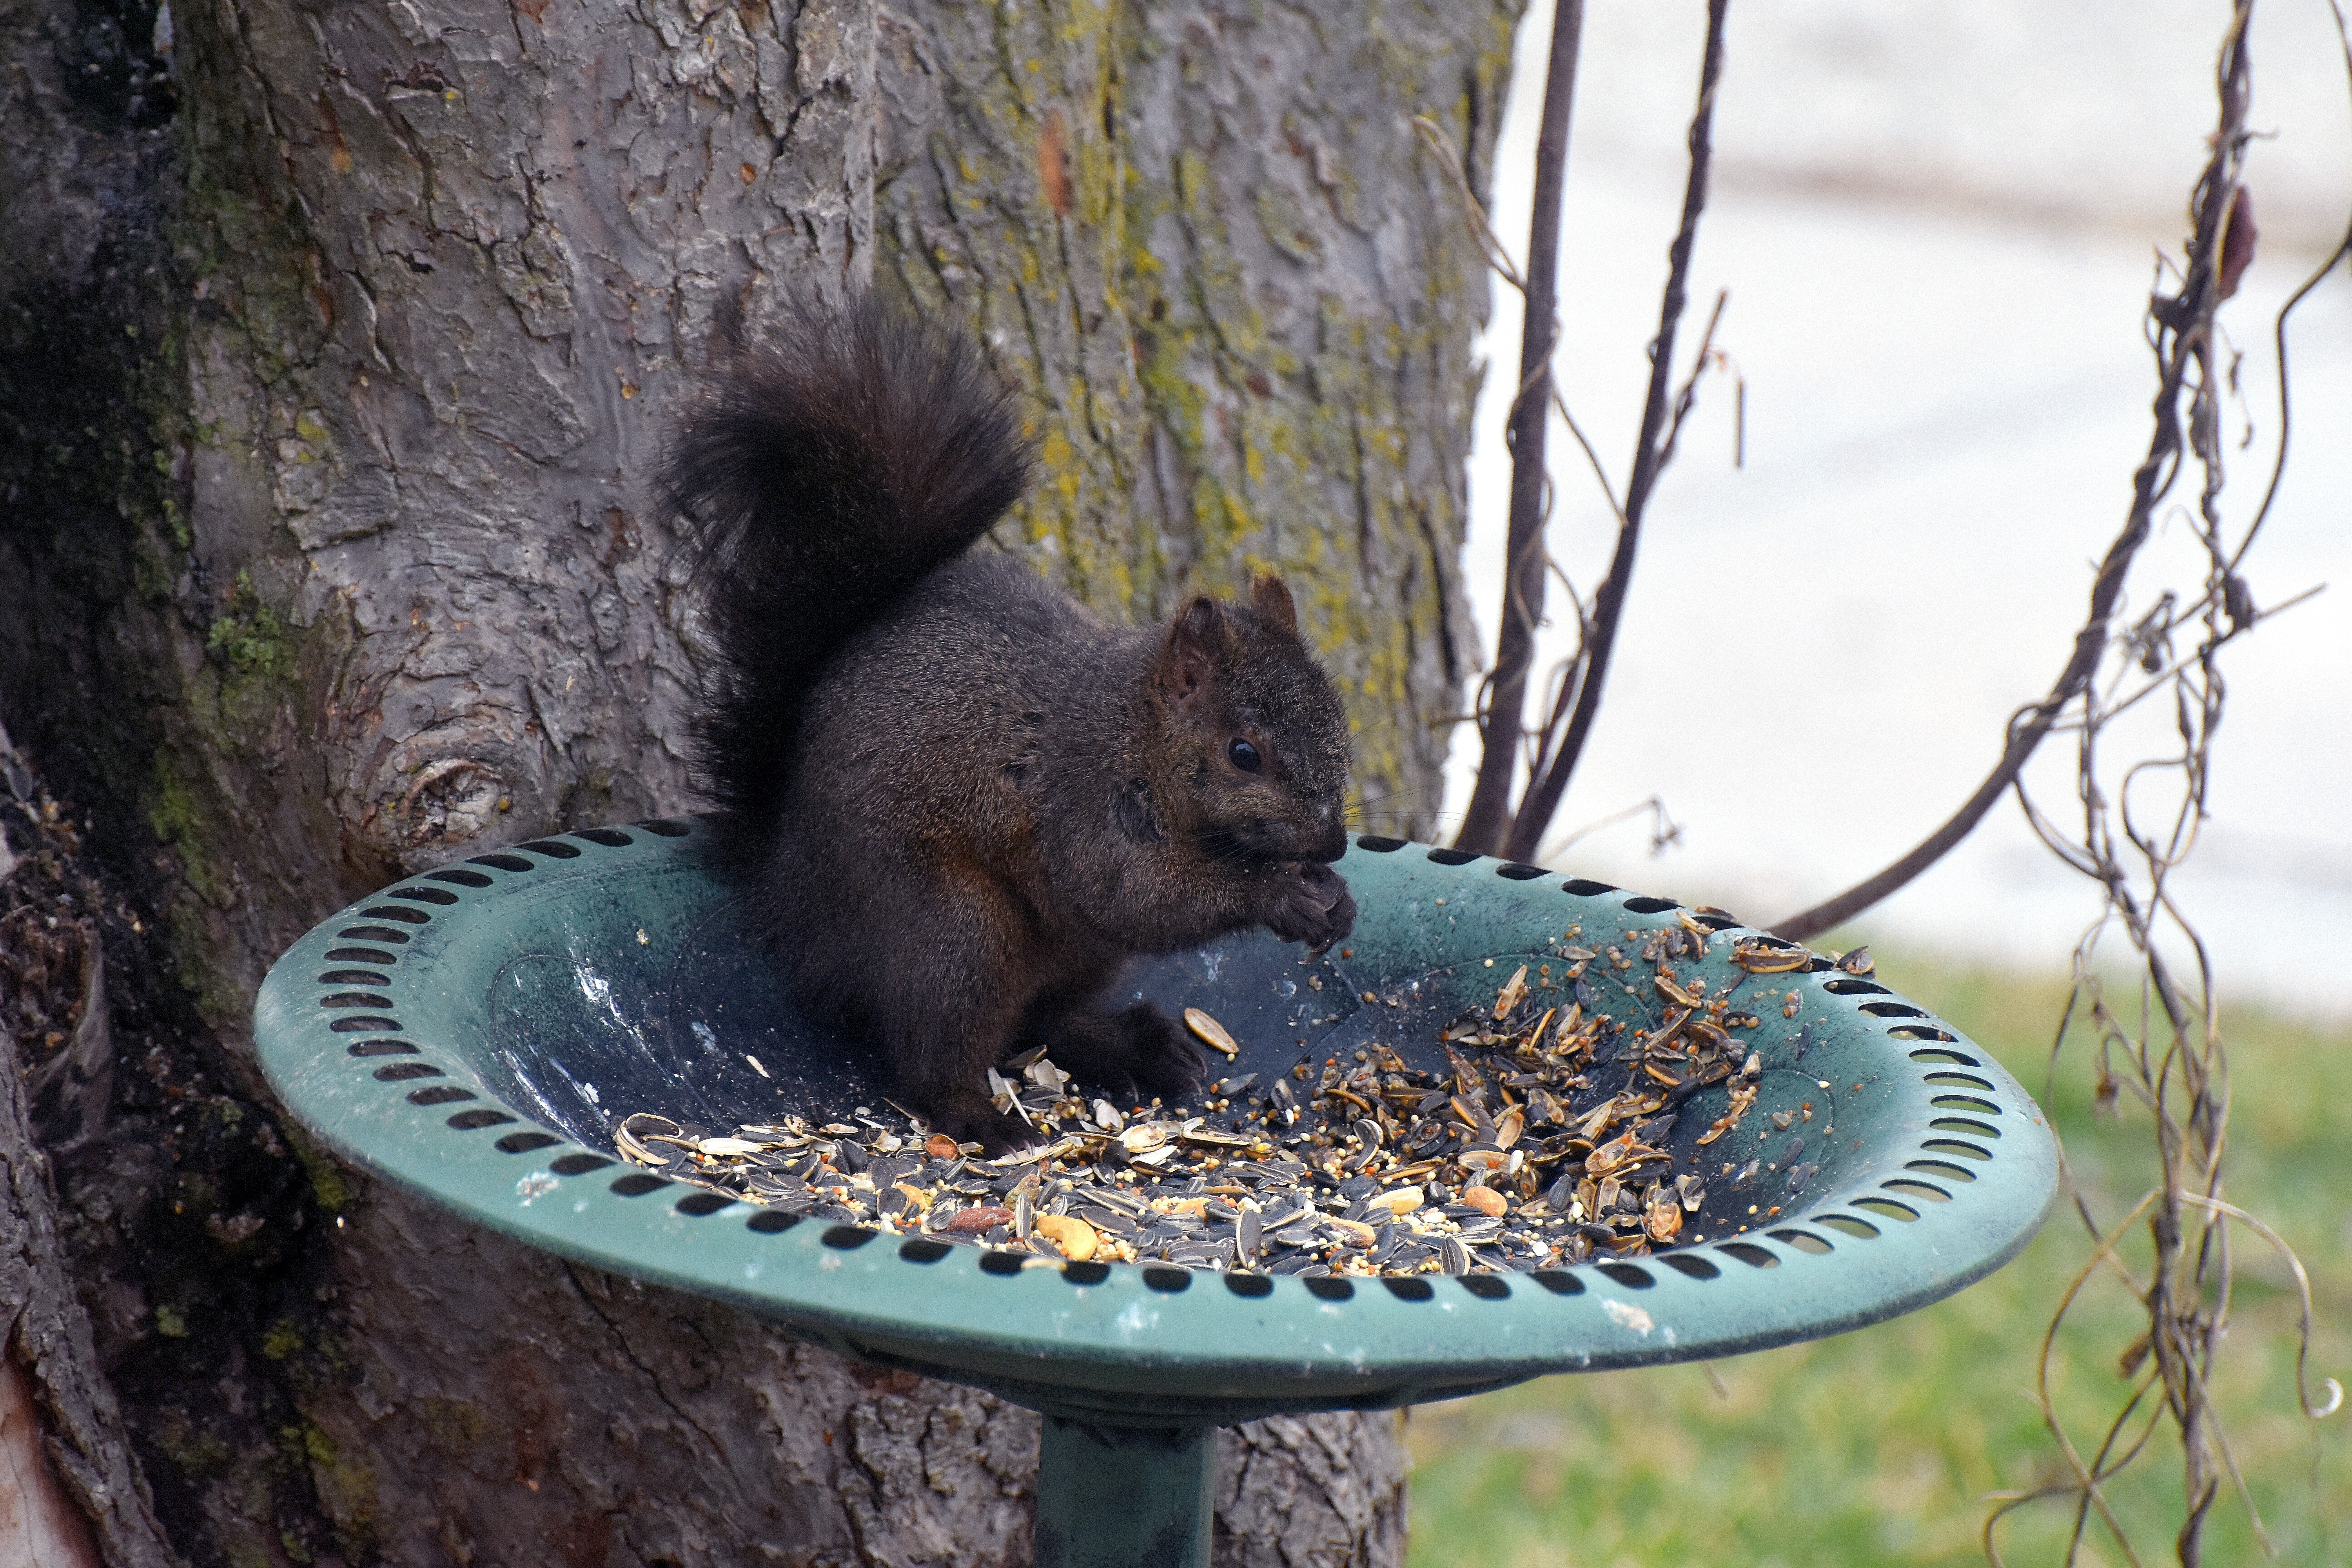 Little black squirrel | image tagged in squirrel,black | made w/ Imgflip meme maker